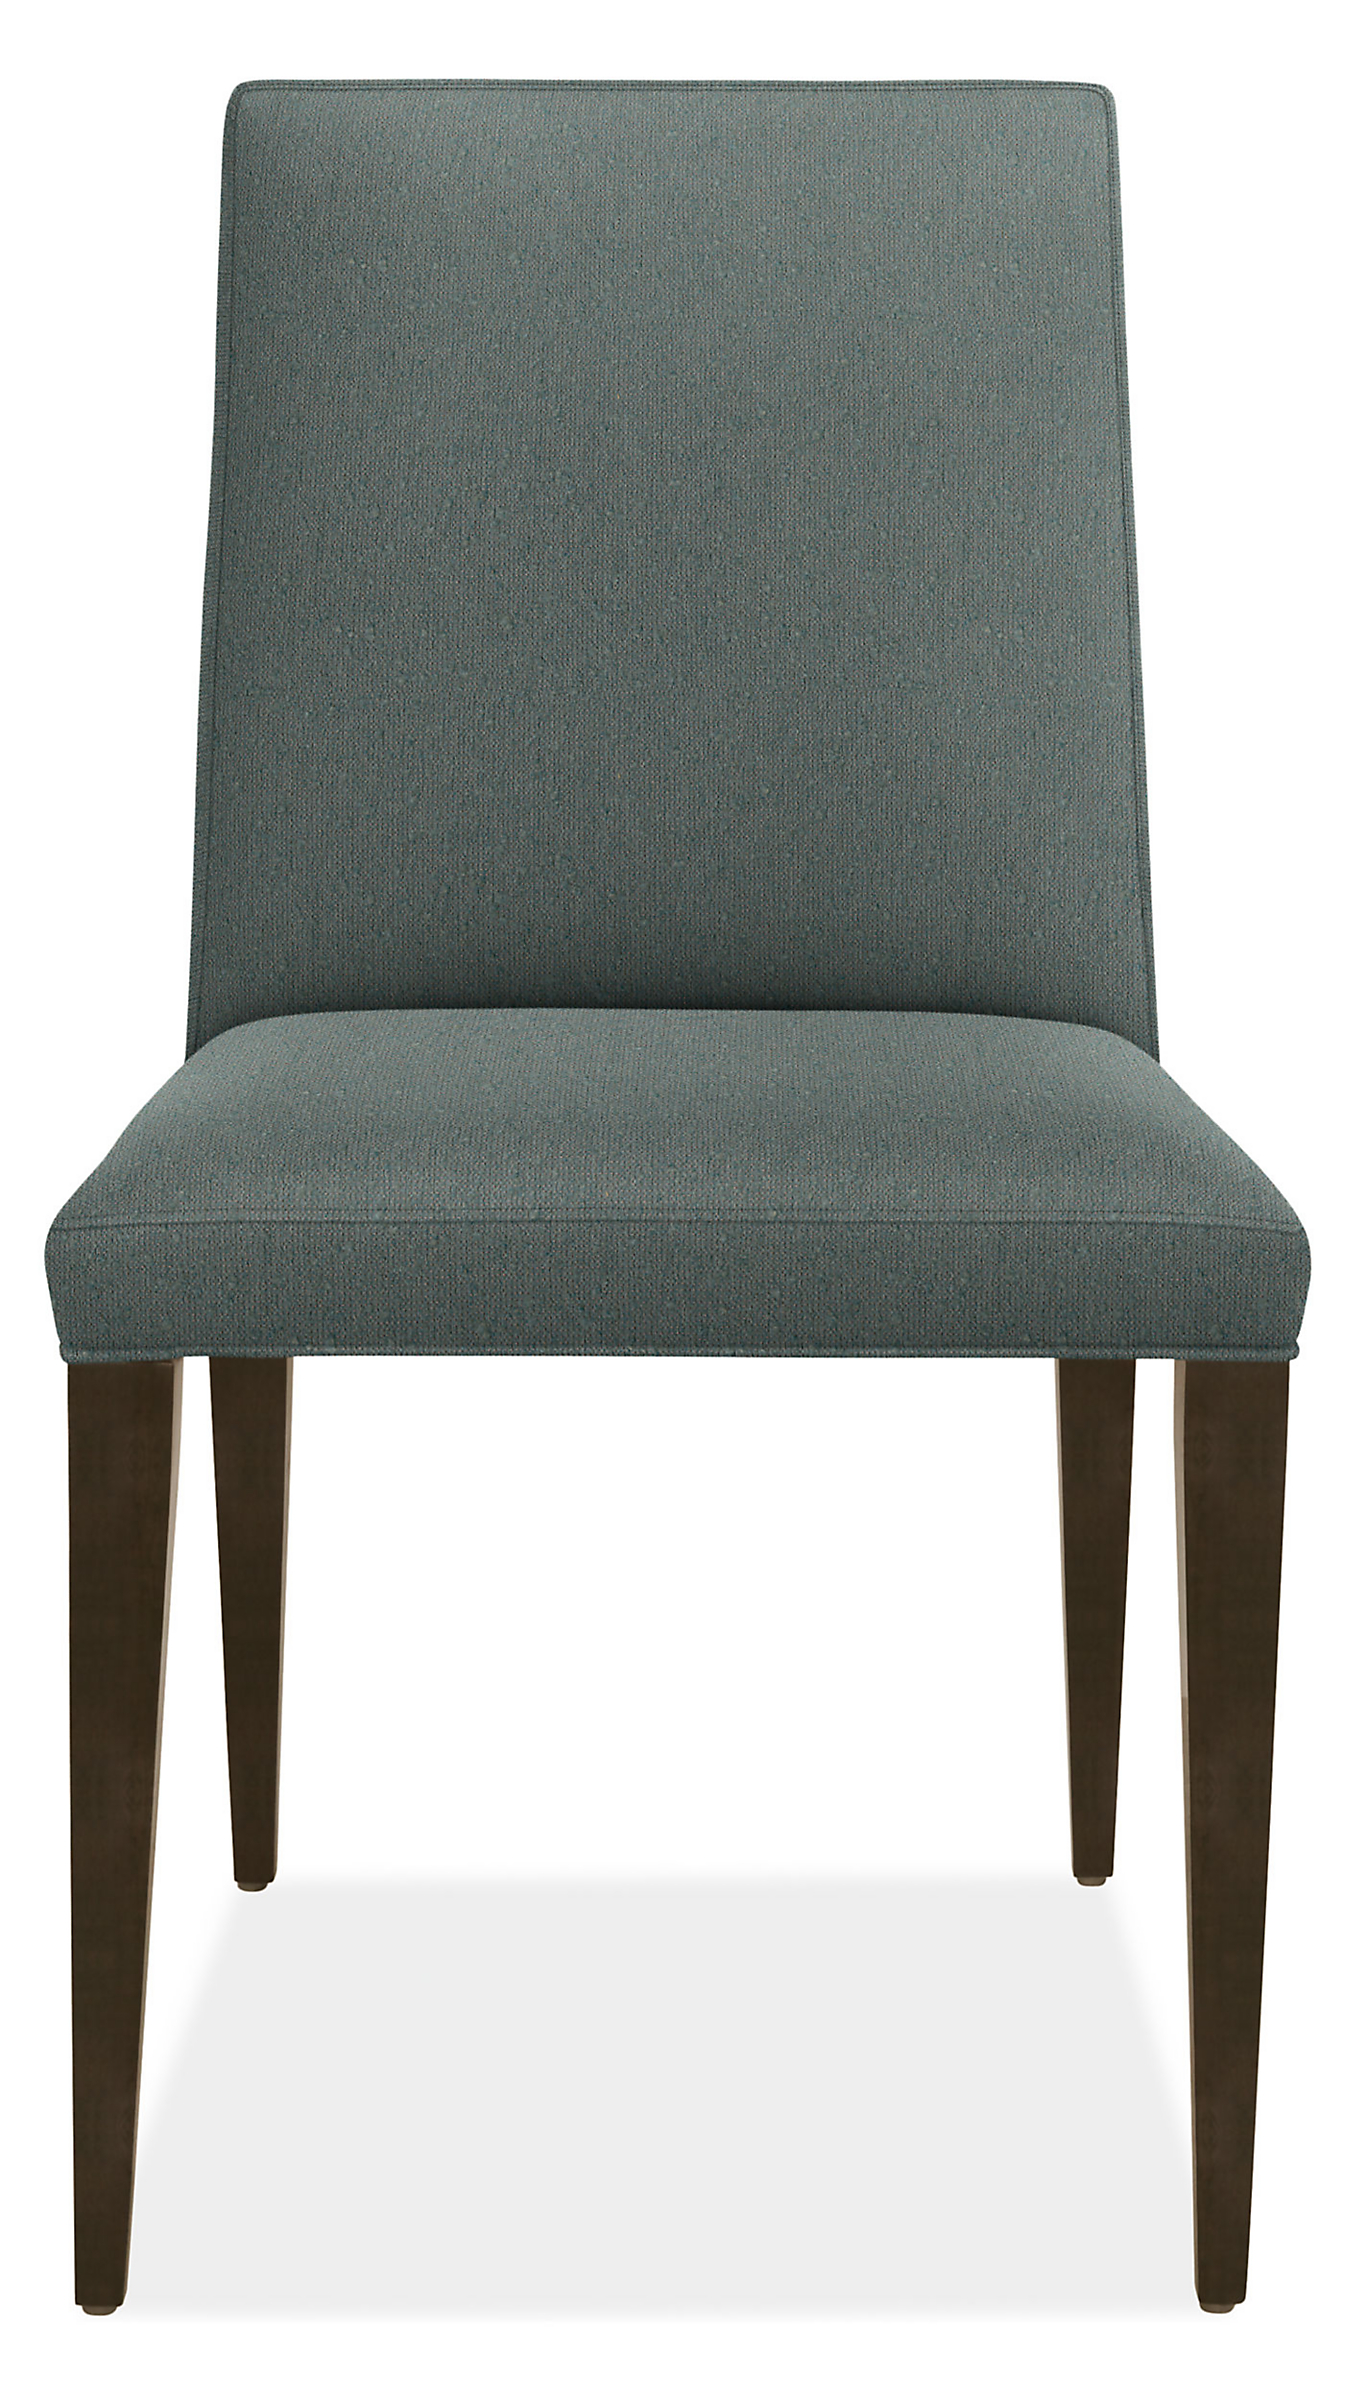 Front view of Ava High-Back Side Chair in Declan Haze with Charcoal Legs.